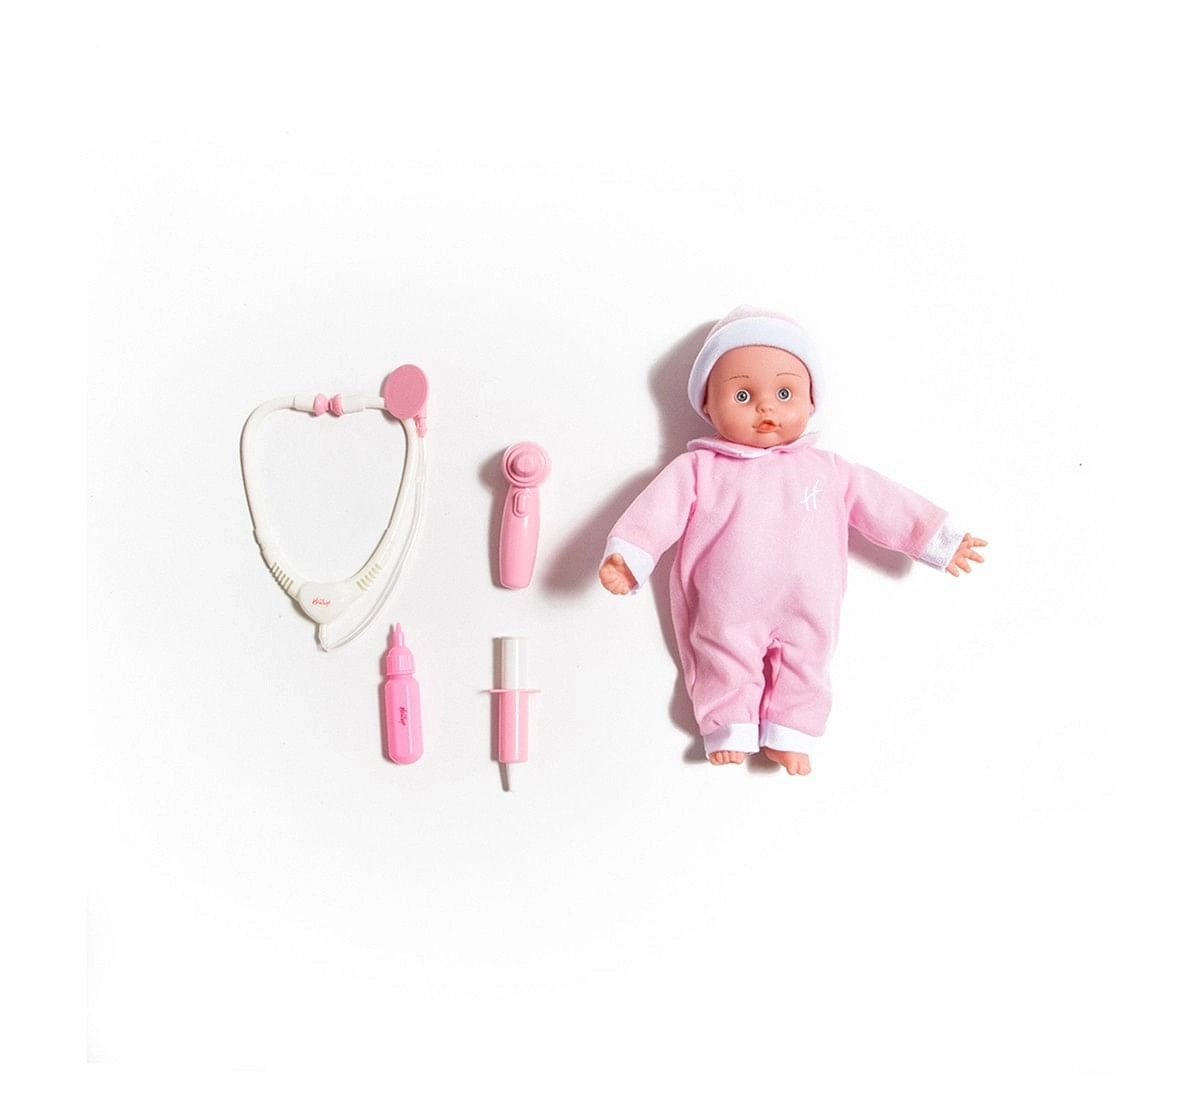 Baby Ellie  Docter Doll - Make Me Better Dolls & Accessories for Kids age 12M+ 